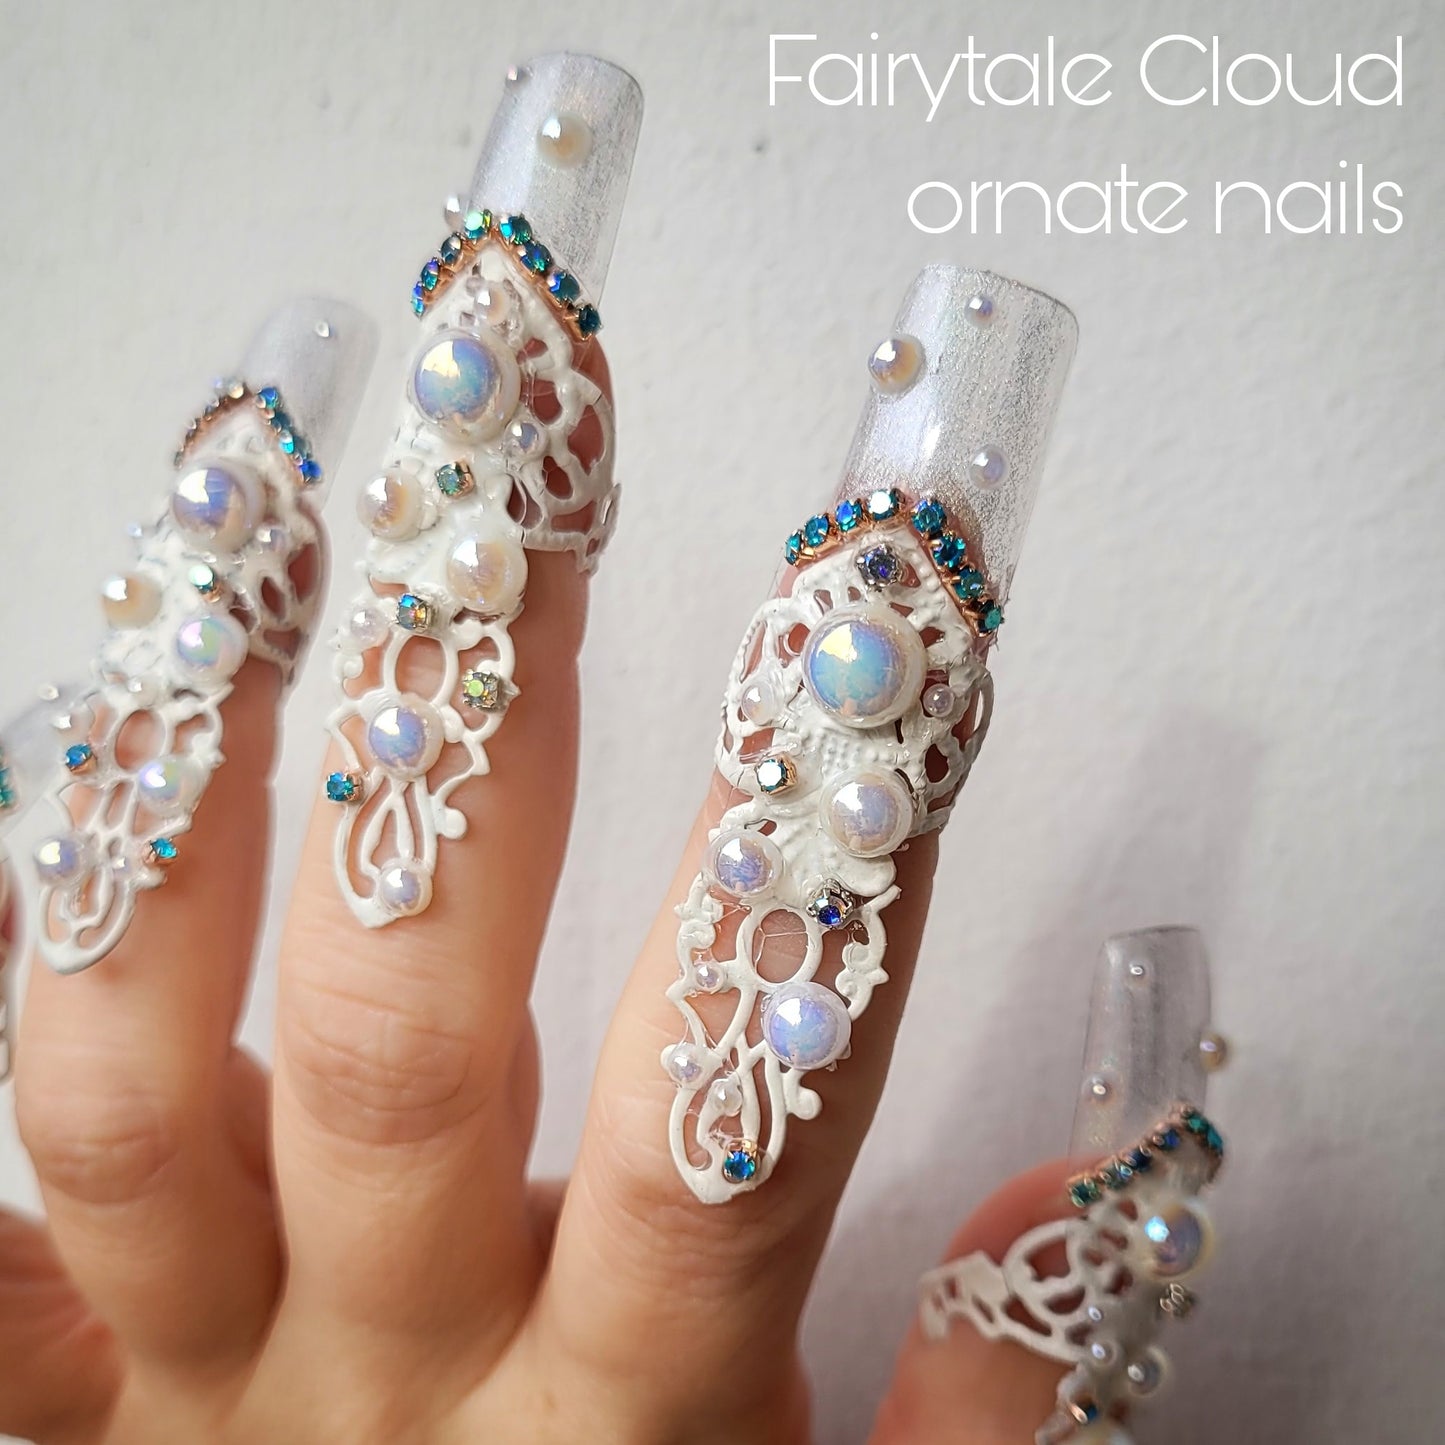 Made-to-order: the Fairytale Cloud ornate nails